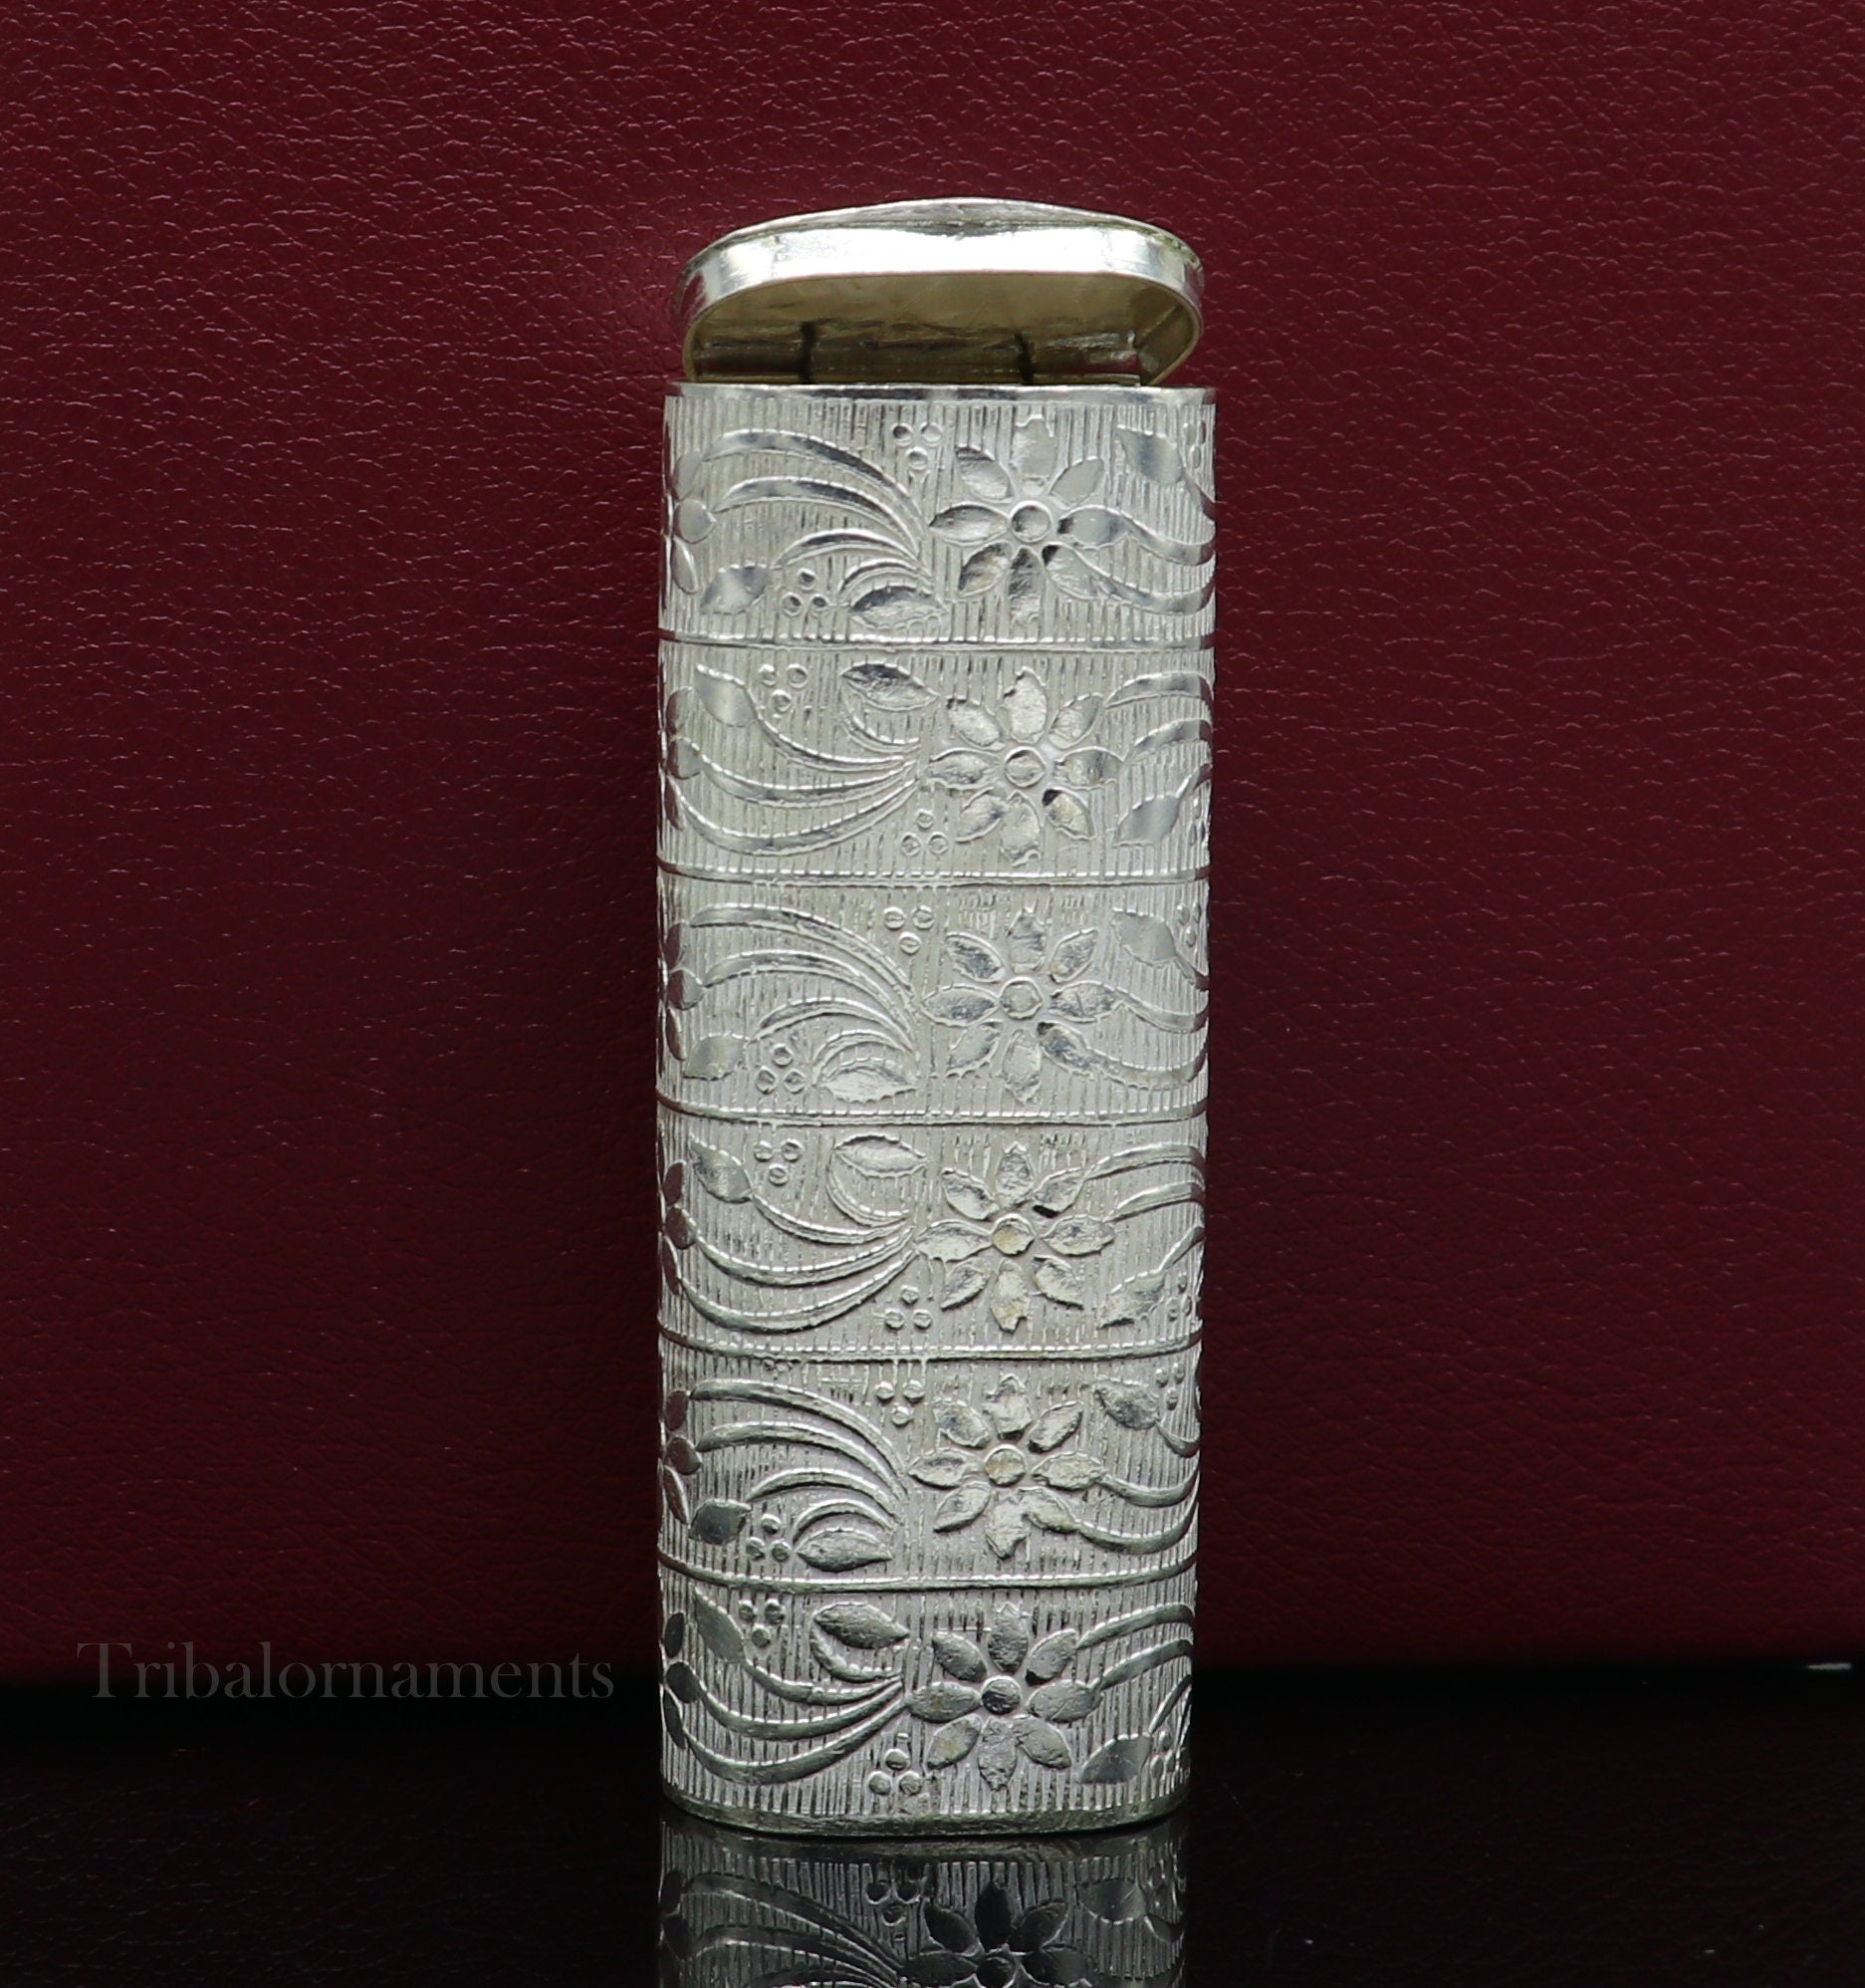 Silver Cigarette case Amazing 925 sterling silver handmade floral design cigarette box, trinket box, best gifting article from india stb319 - TRIBAL ORNAMENTS